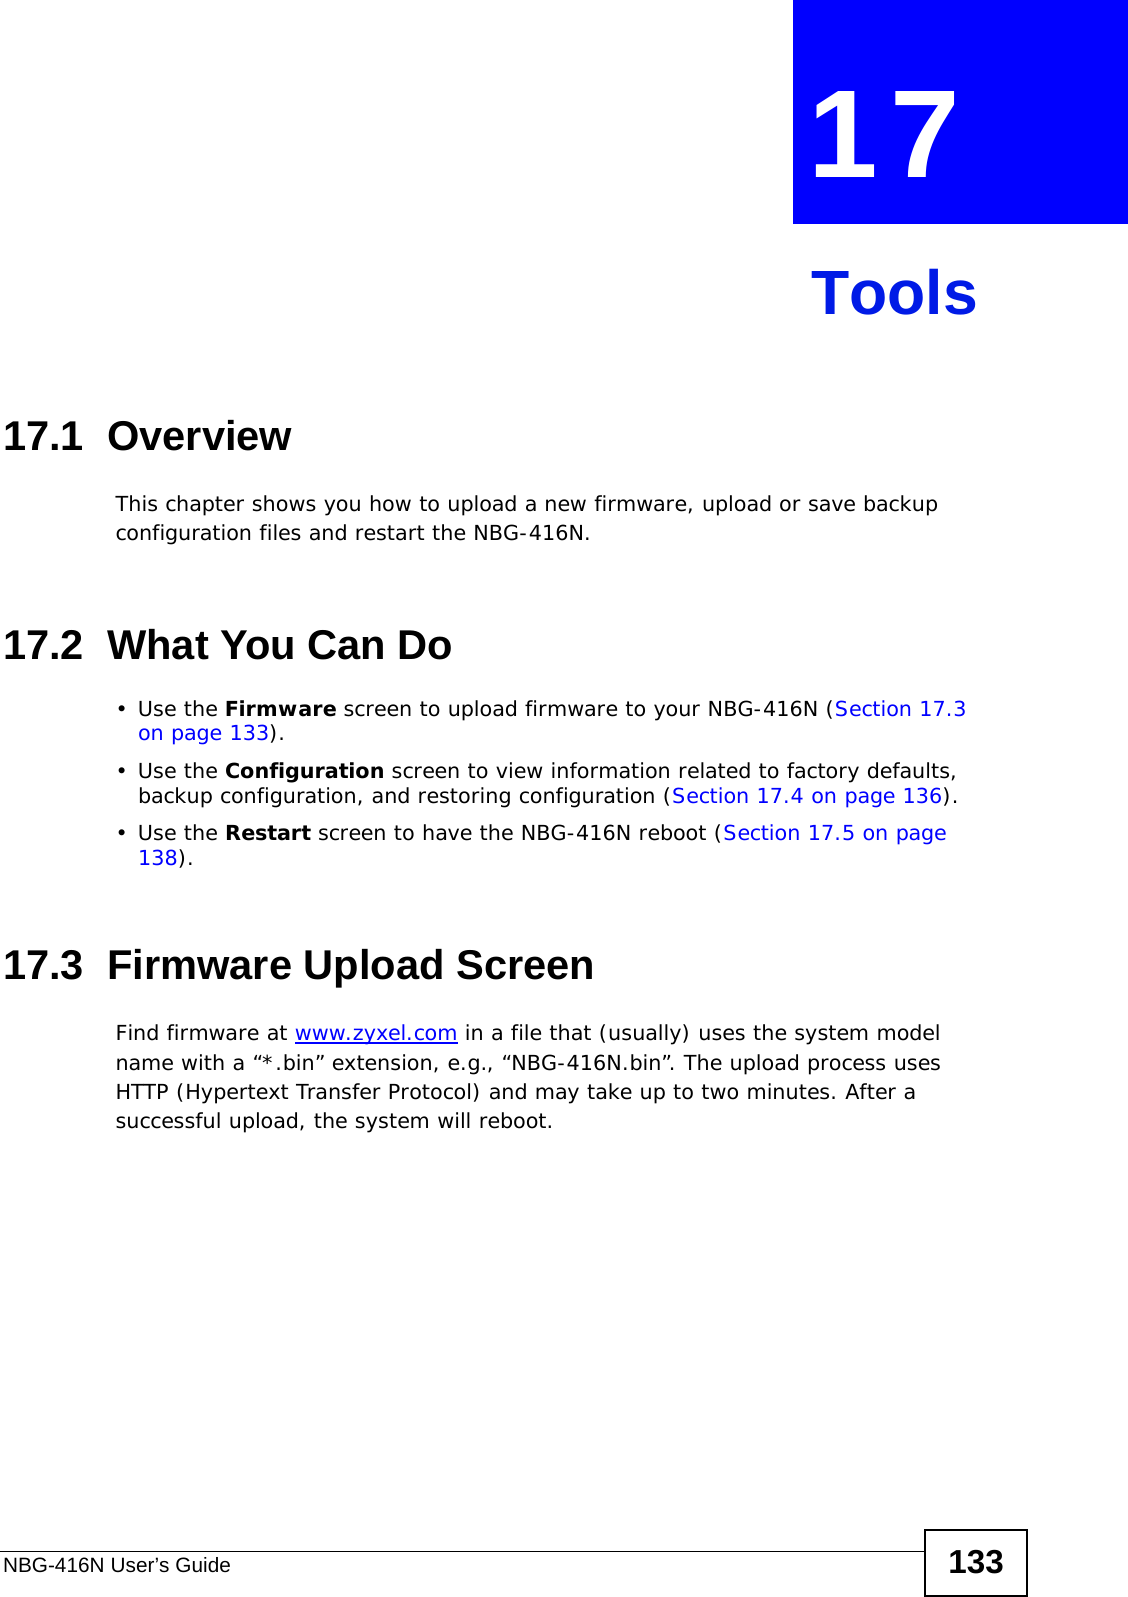 NBG-416N User’s Guide 133CHAPTER  17 Tools17.1  OverviewThis chapter shows you how to upload a new firmware, upload or save backup configuration files and restart the NBG-416N.17.2  What You Can Do•Use the Firmware screen to upload firmware to your NBG-416N (Section 17.3 on page 133).•Use the Configuration screen to view information related to factory defaults, backup configuration, and restoring configuration (Section 17.4 on page 136).•Use the Restart screen to have the NBG-416N reboot (Section 17.5 on page 138).17.3  Firmware Upload ScreenFind firmware at www.zyxel.com in a file that (usually) uses the system model name with a “*.bin” extension, e.g., “NBG-416N.bin”. The upload process uses HTTP (Hypertext Transfer Protocol) and may take up to two minutes. After a successful upload, the system will reboot.